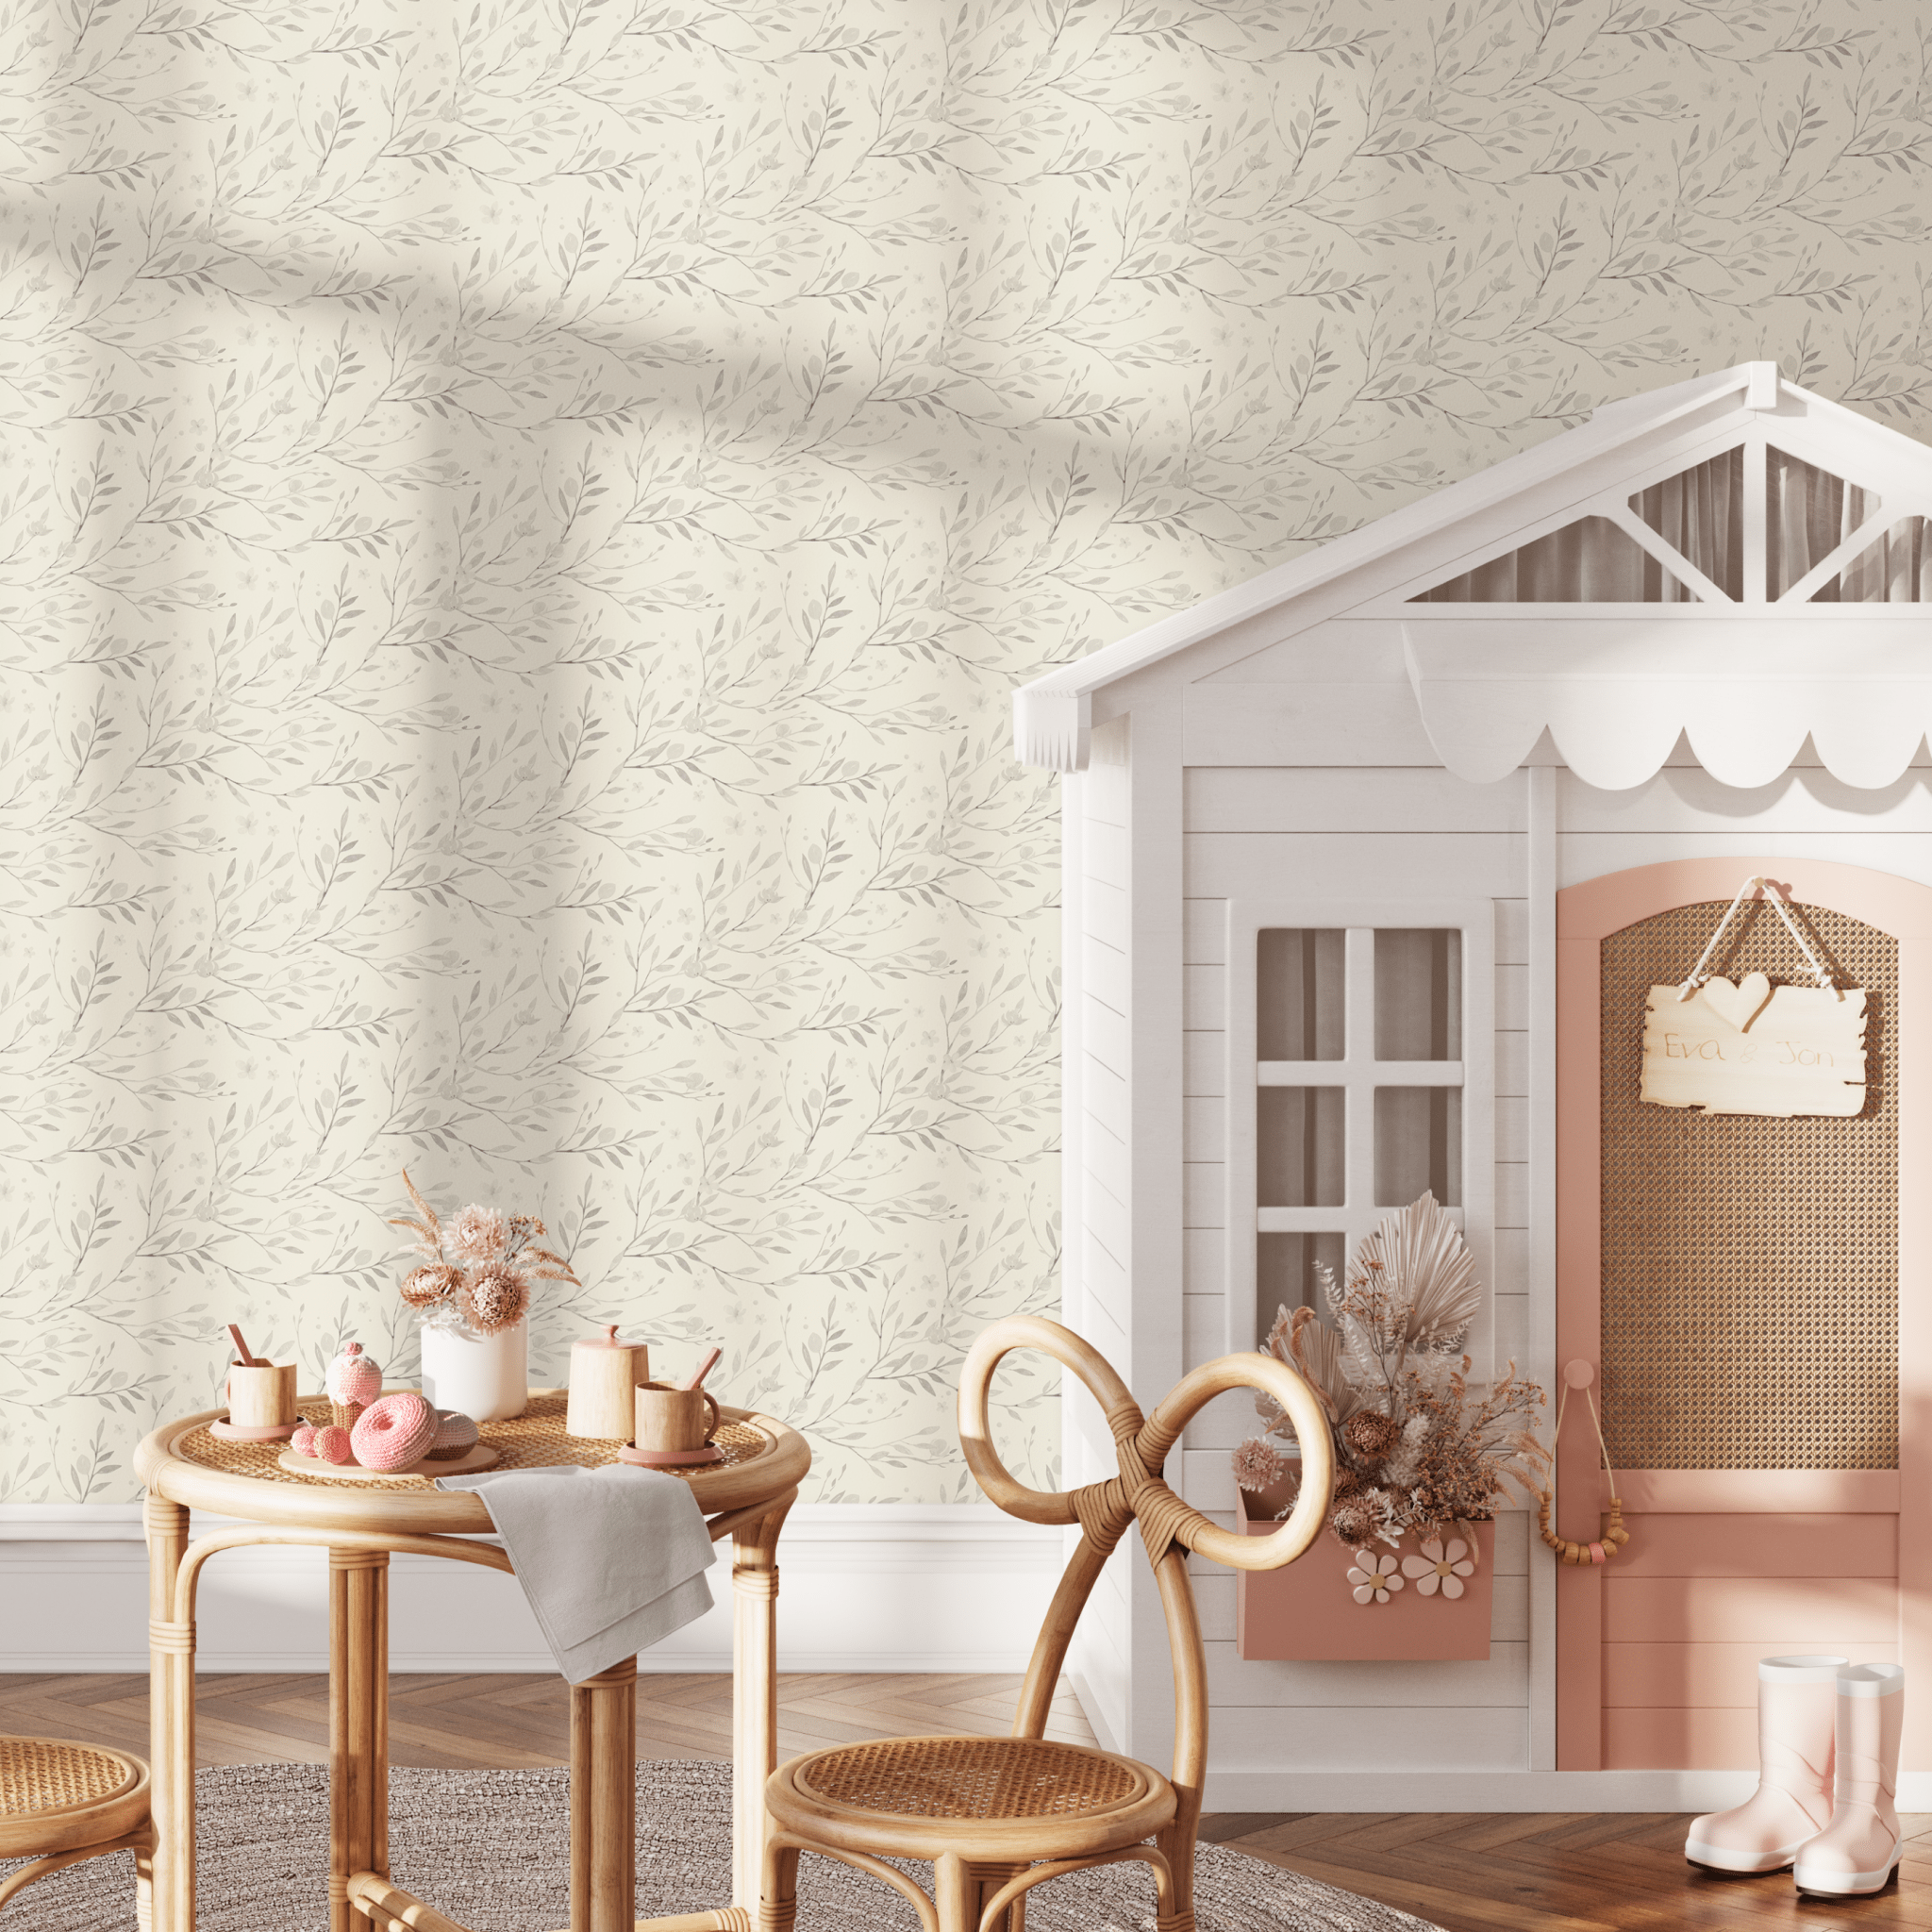 Cute floral neutral coloured peel and stick wallpaper in a child's playroom